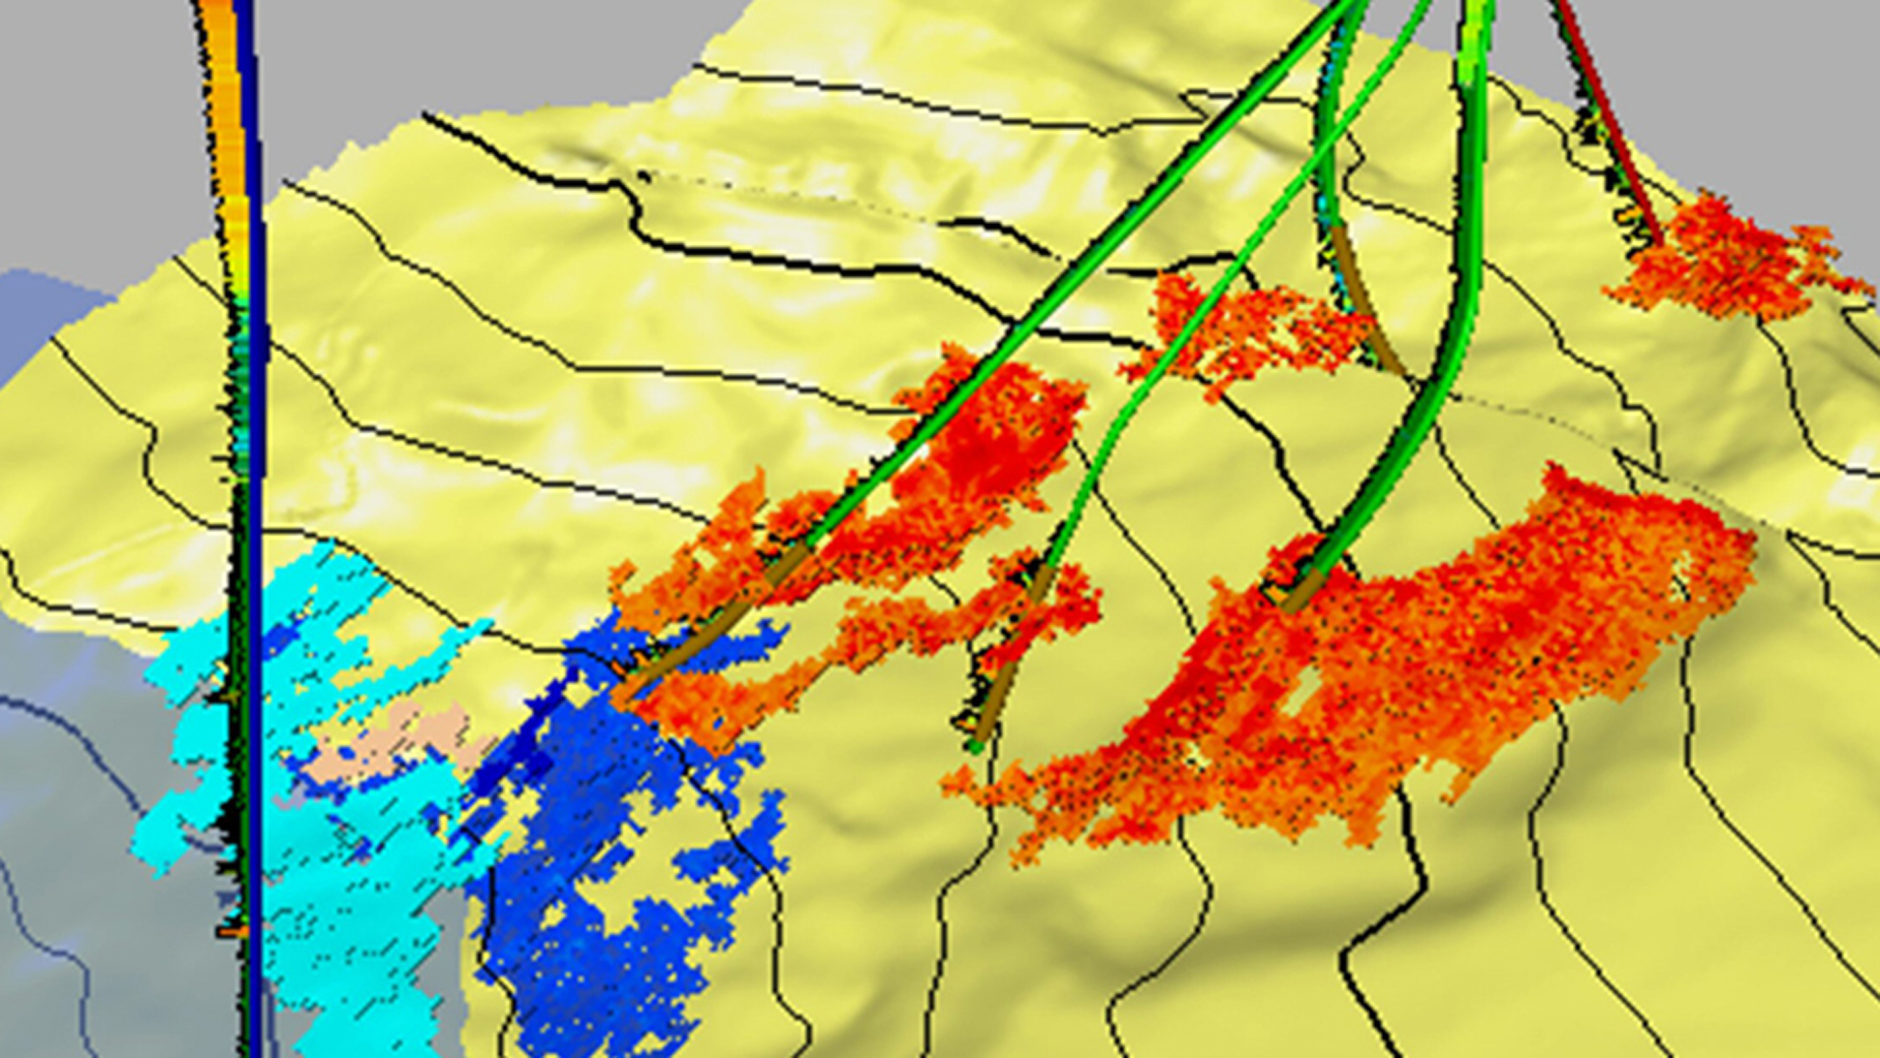 Image Photo— In 4D seismic maps such as this one from a West Africa oil field, each region in the map represents an area of change in the reservoir over a period of time. Here, blue represents water movement and red indicates an increase in gas. Knowing how the fluid content of a reservoir changes during production is crucial to efficiently extracting its resources. In this case, water is injected into the reservoirs to help maintain pressure, resulting in greater oil recovery and reducing the need for additional drilling.